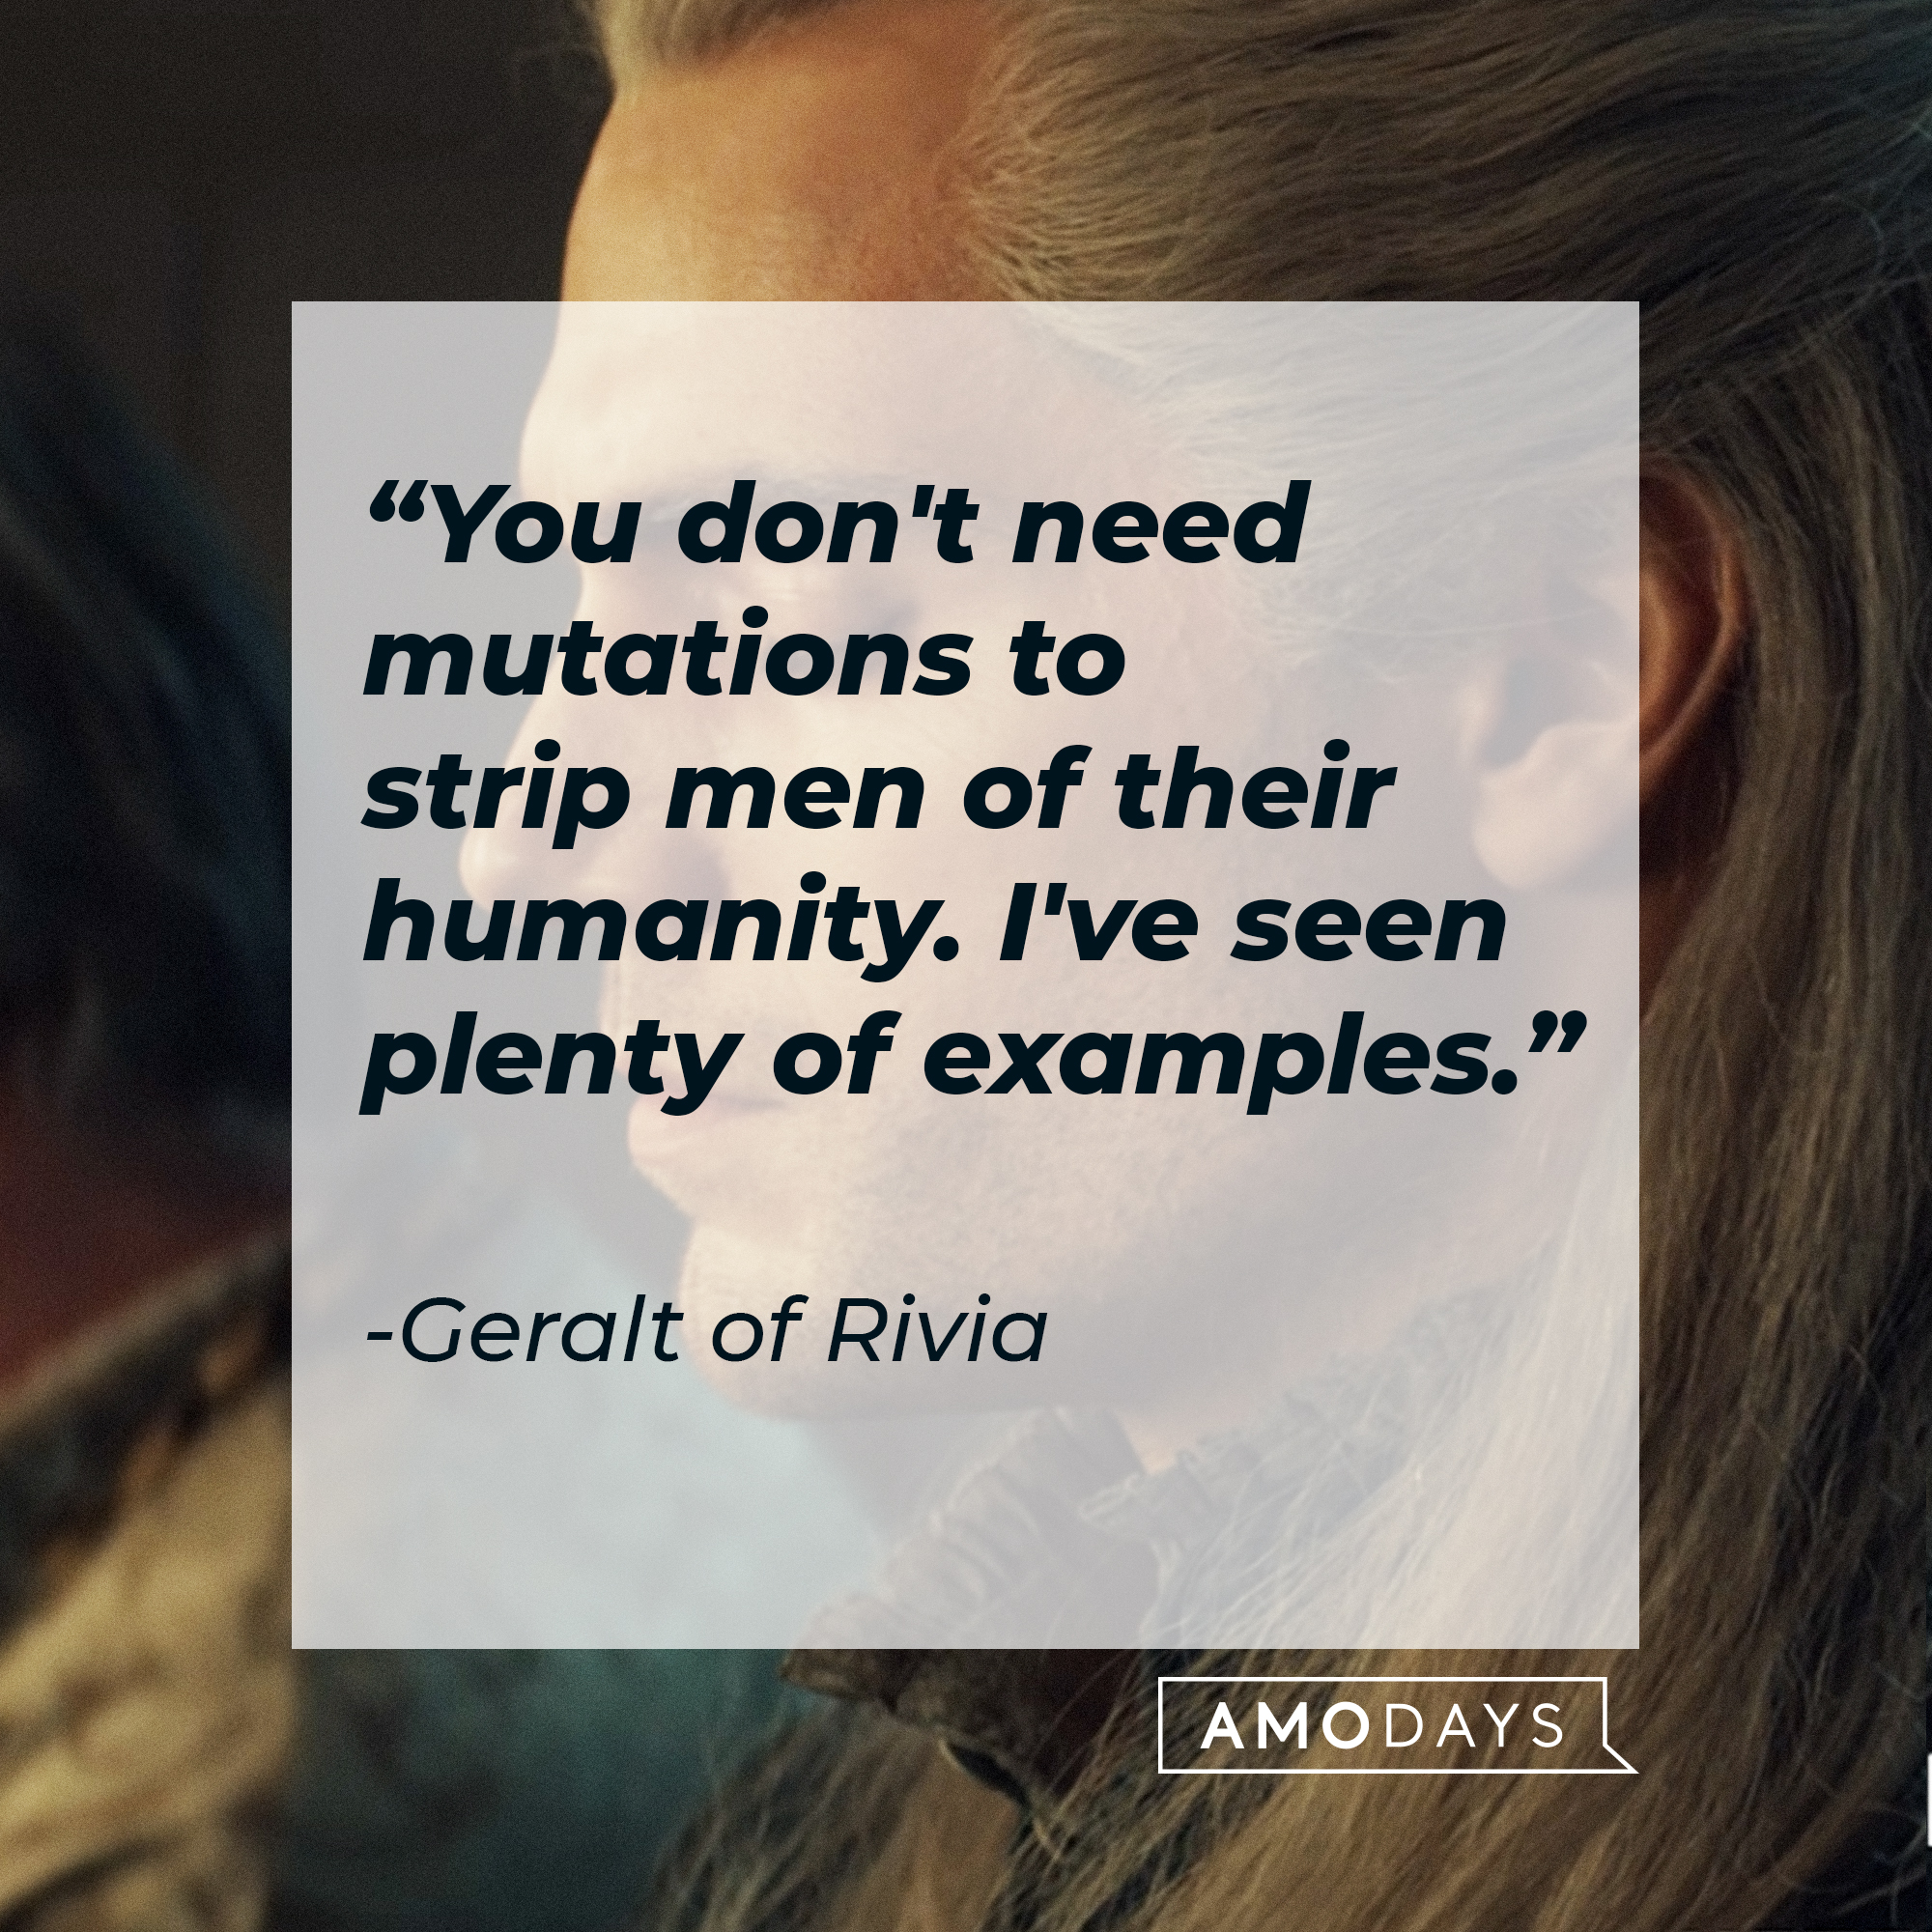 Geralt of Rivia's quote: "You don't need mutations to strip men of their humanity. I've seen plenty of examples." | Source: YouTube/Netflix